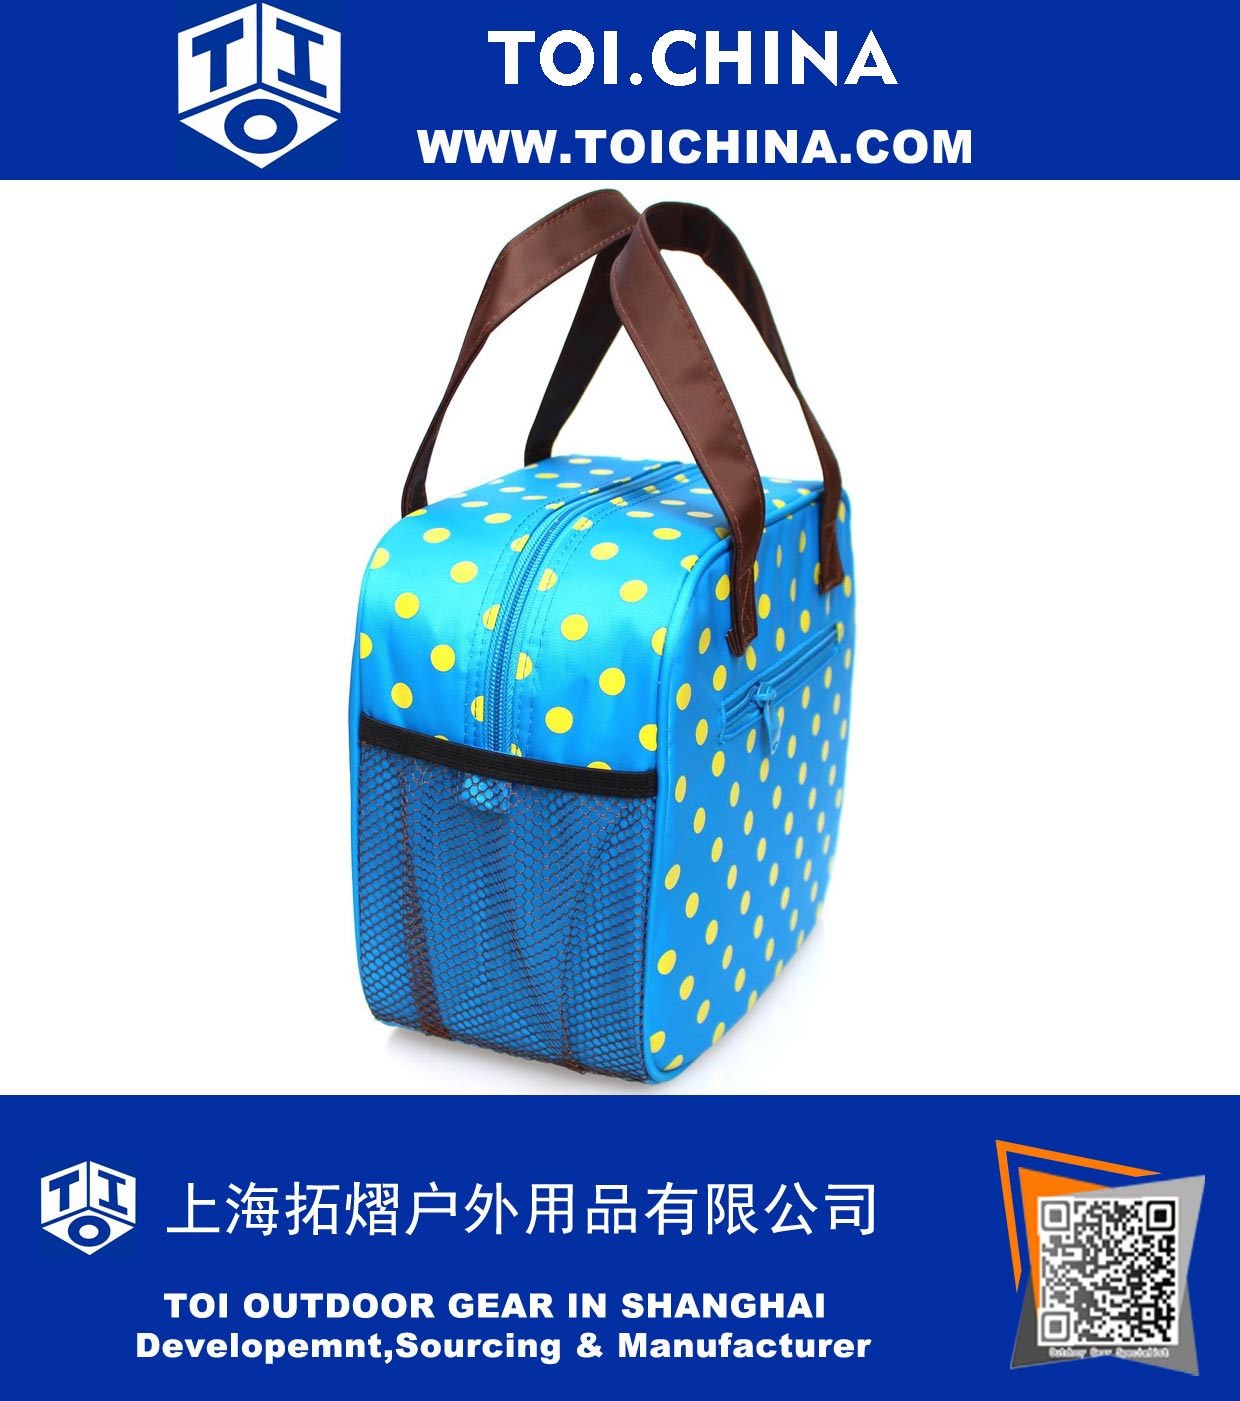  Insulated Picnic Cooler Bag